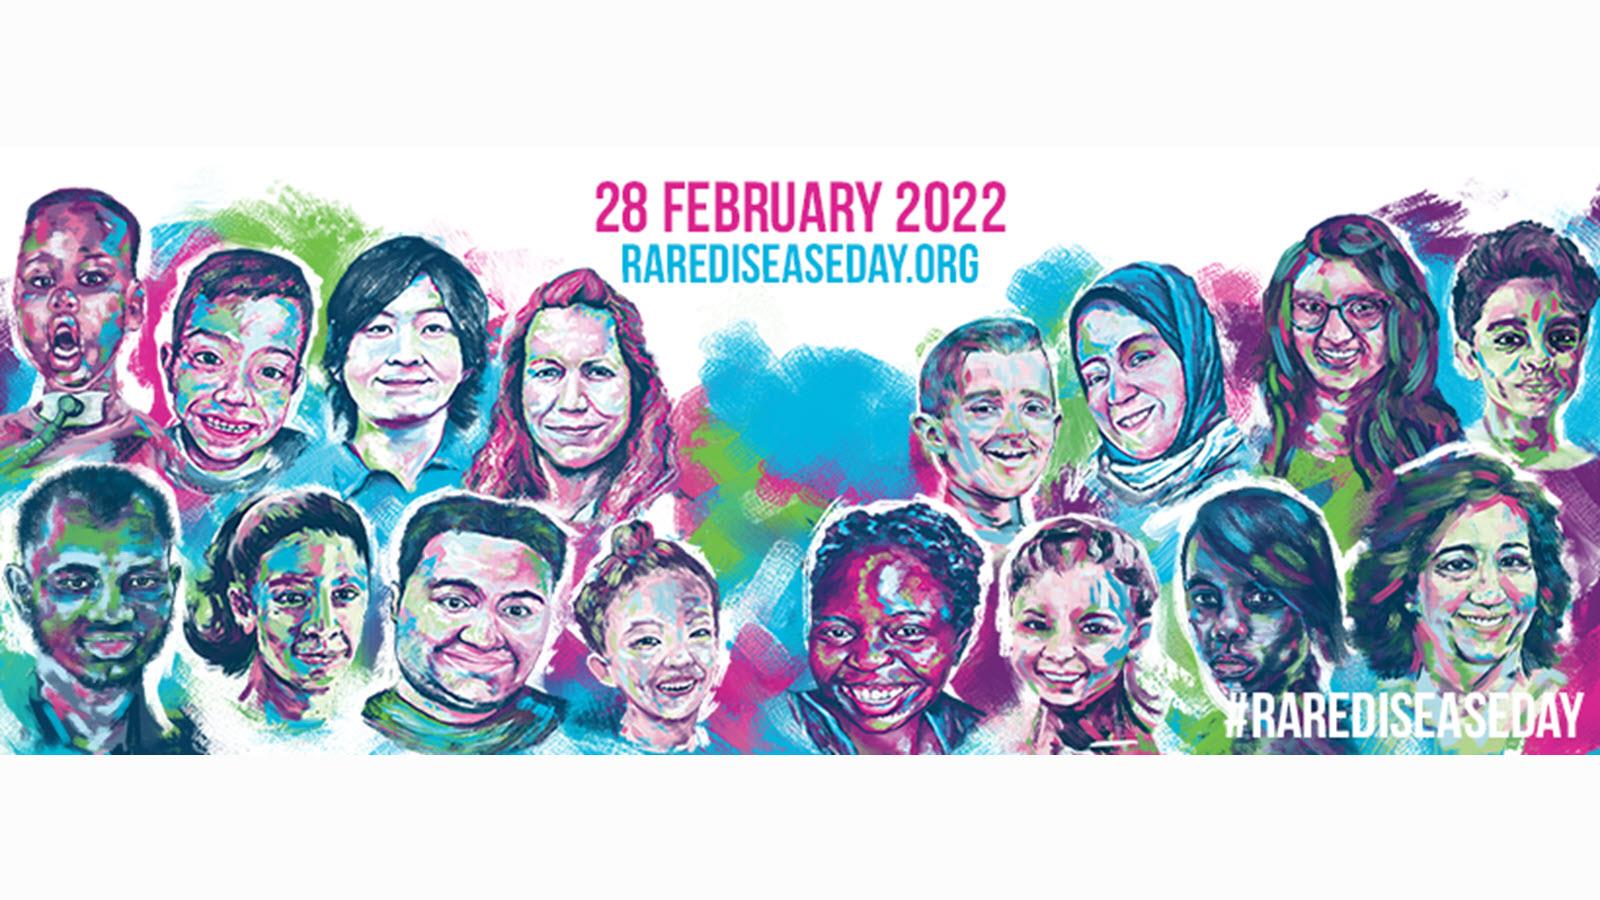 28 February 2022 Rare Disease Day with pink, green and blue sketches of patients